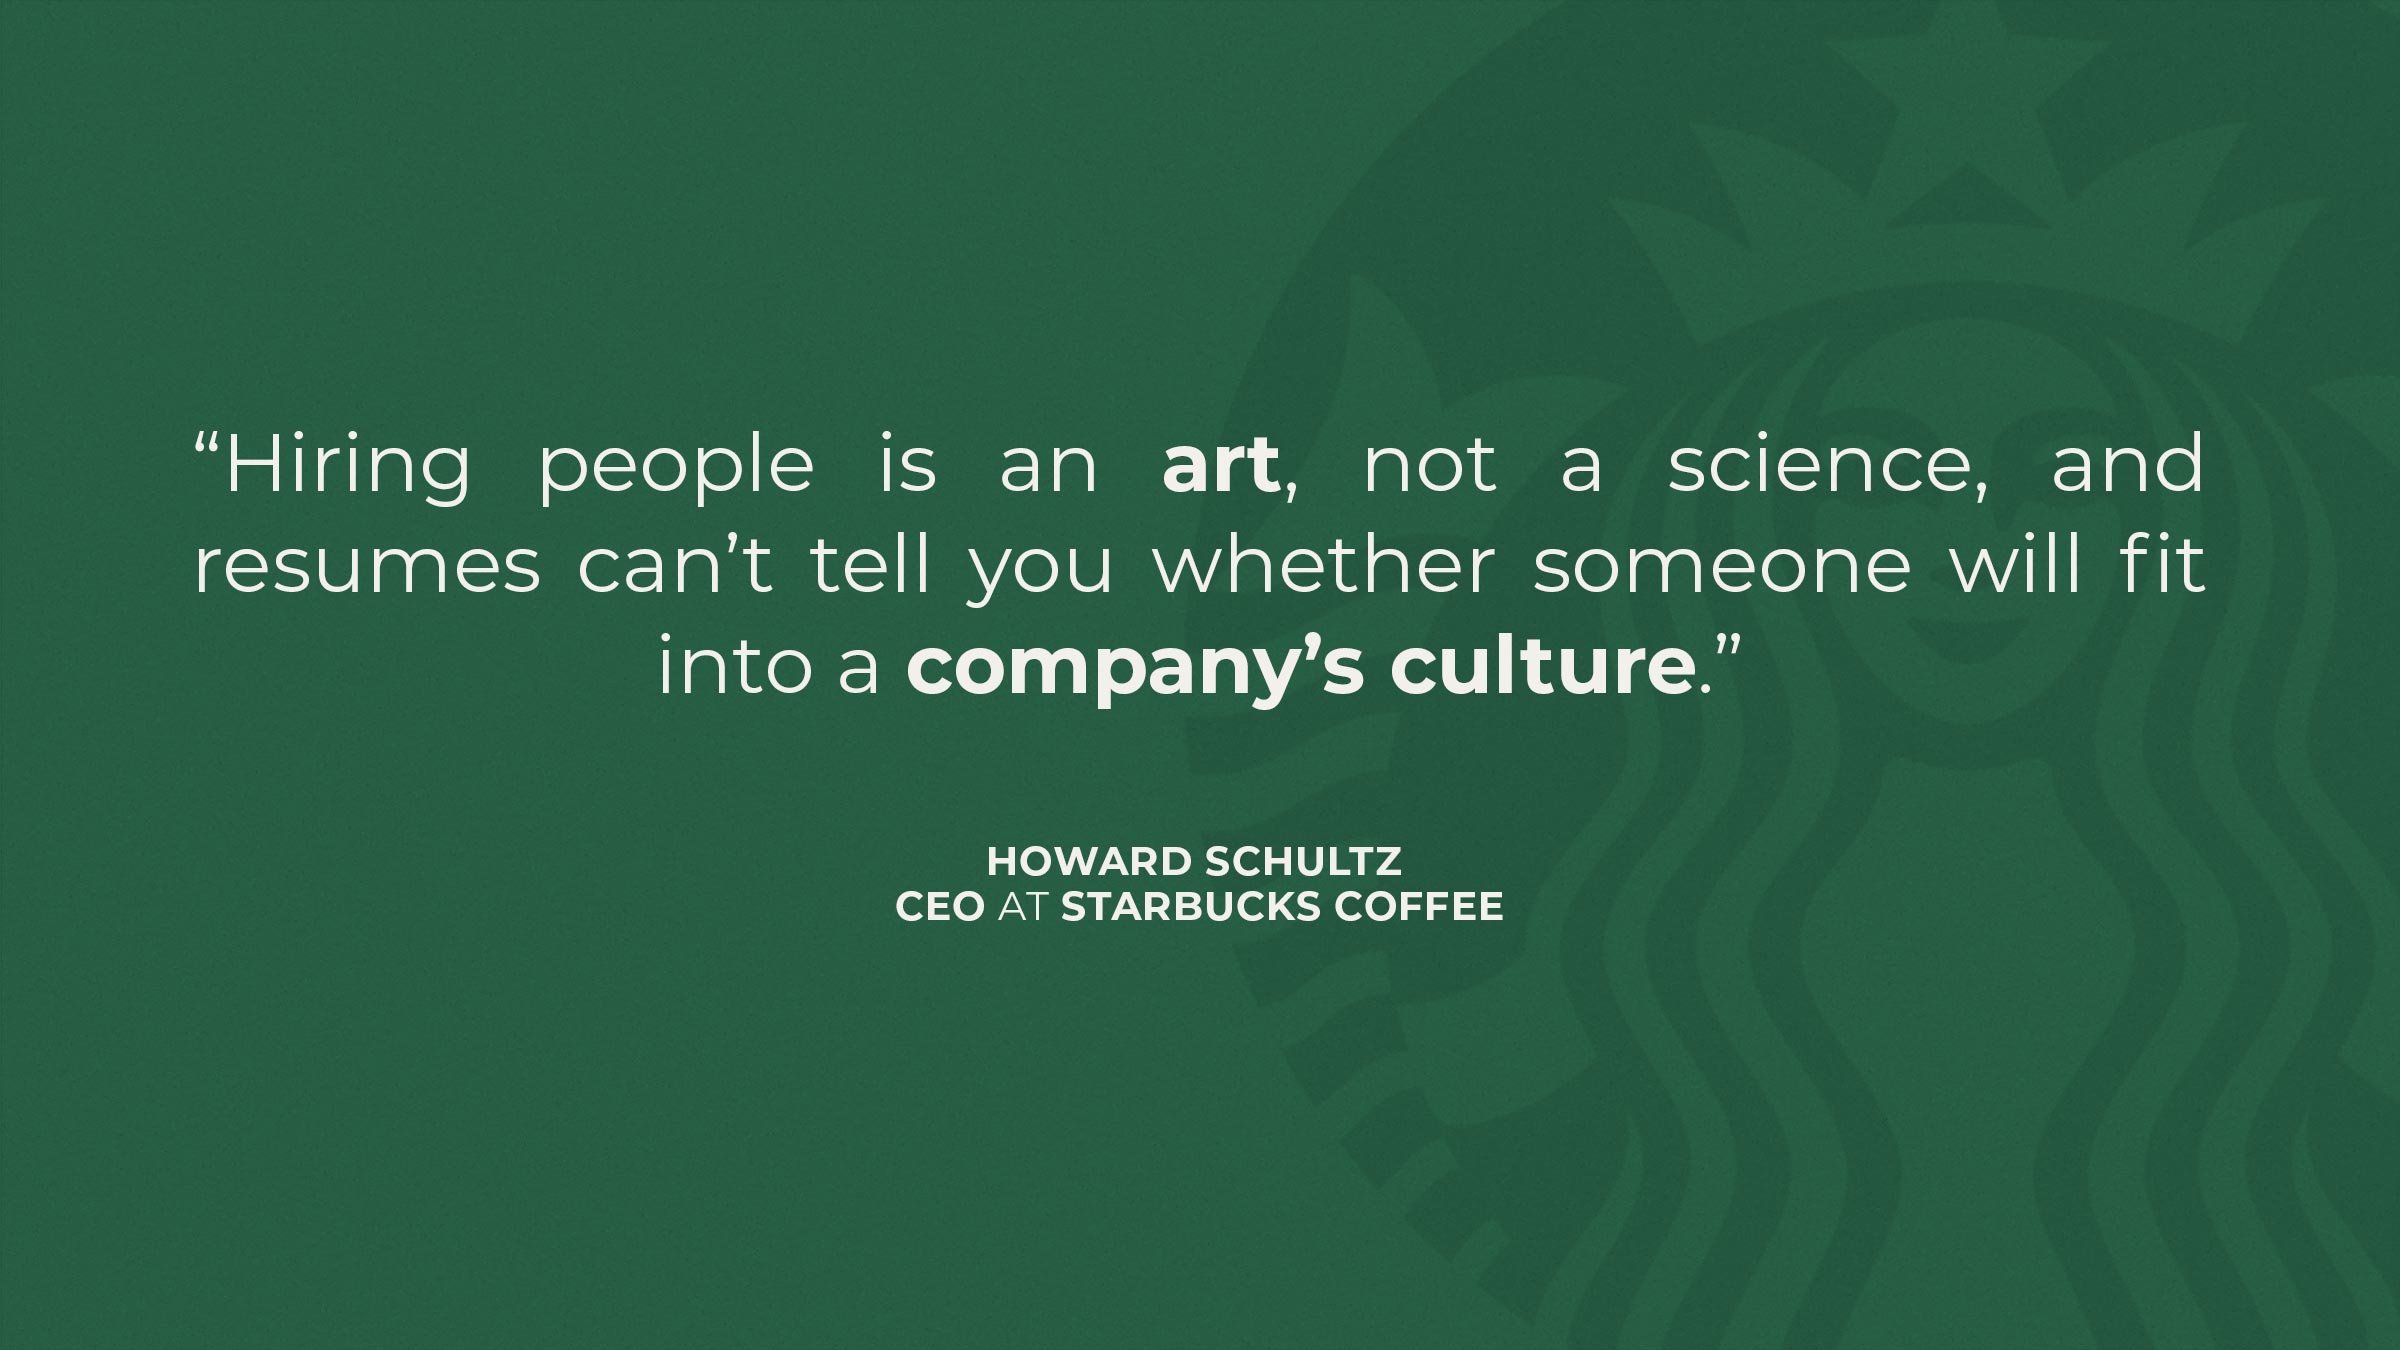  “Hiring people is an art, not a science, and resumes can’t tell you whether someone will fit into a company’s culture.” – Howard Schultz (CEO at Starbucks Coffee)